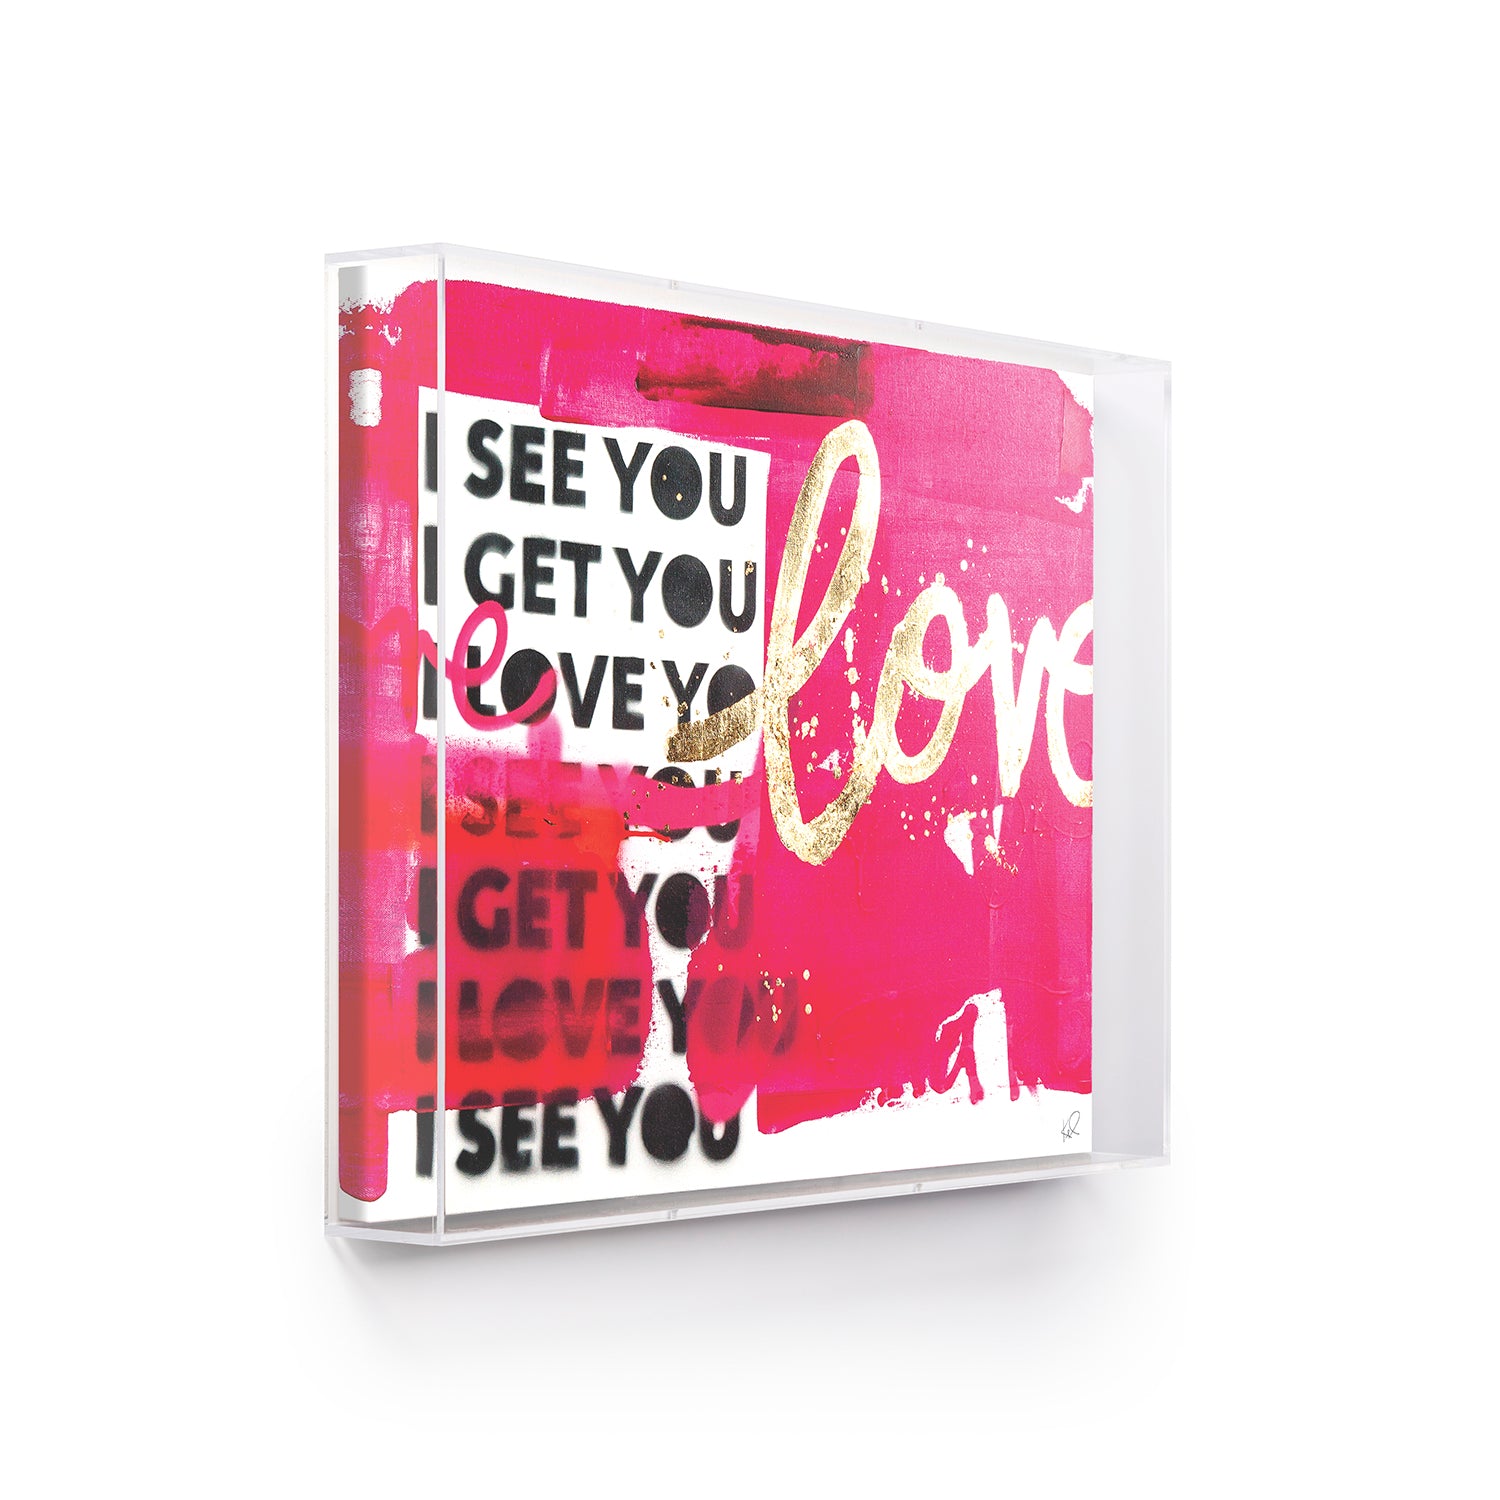 See You Love by Kent Youngstrom